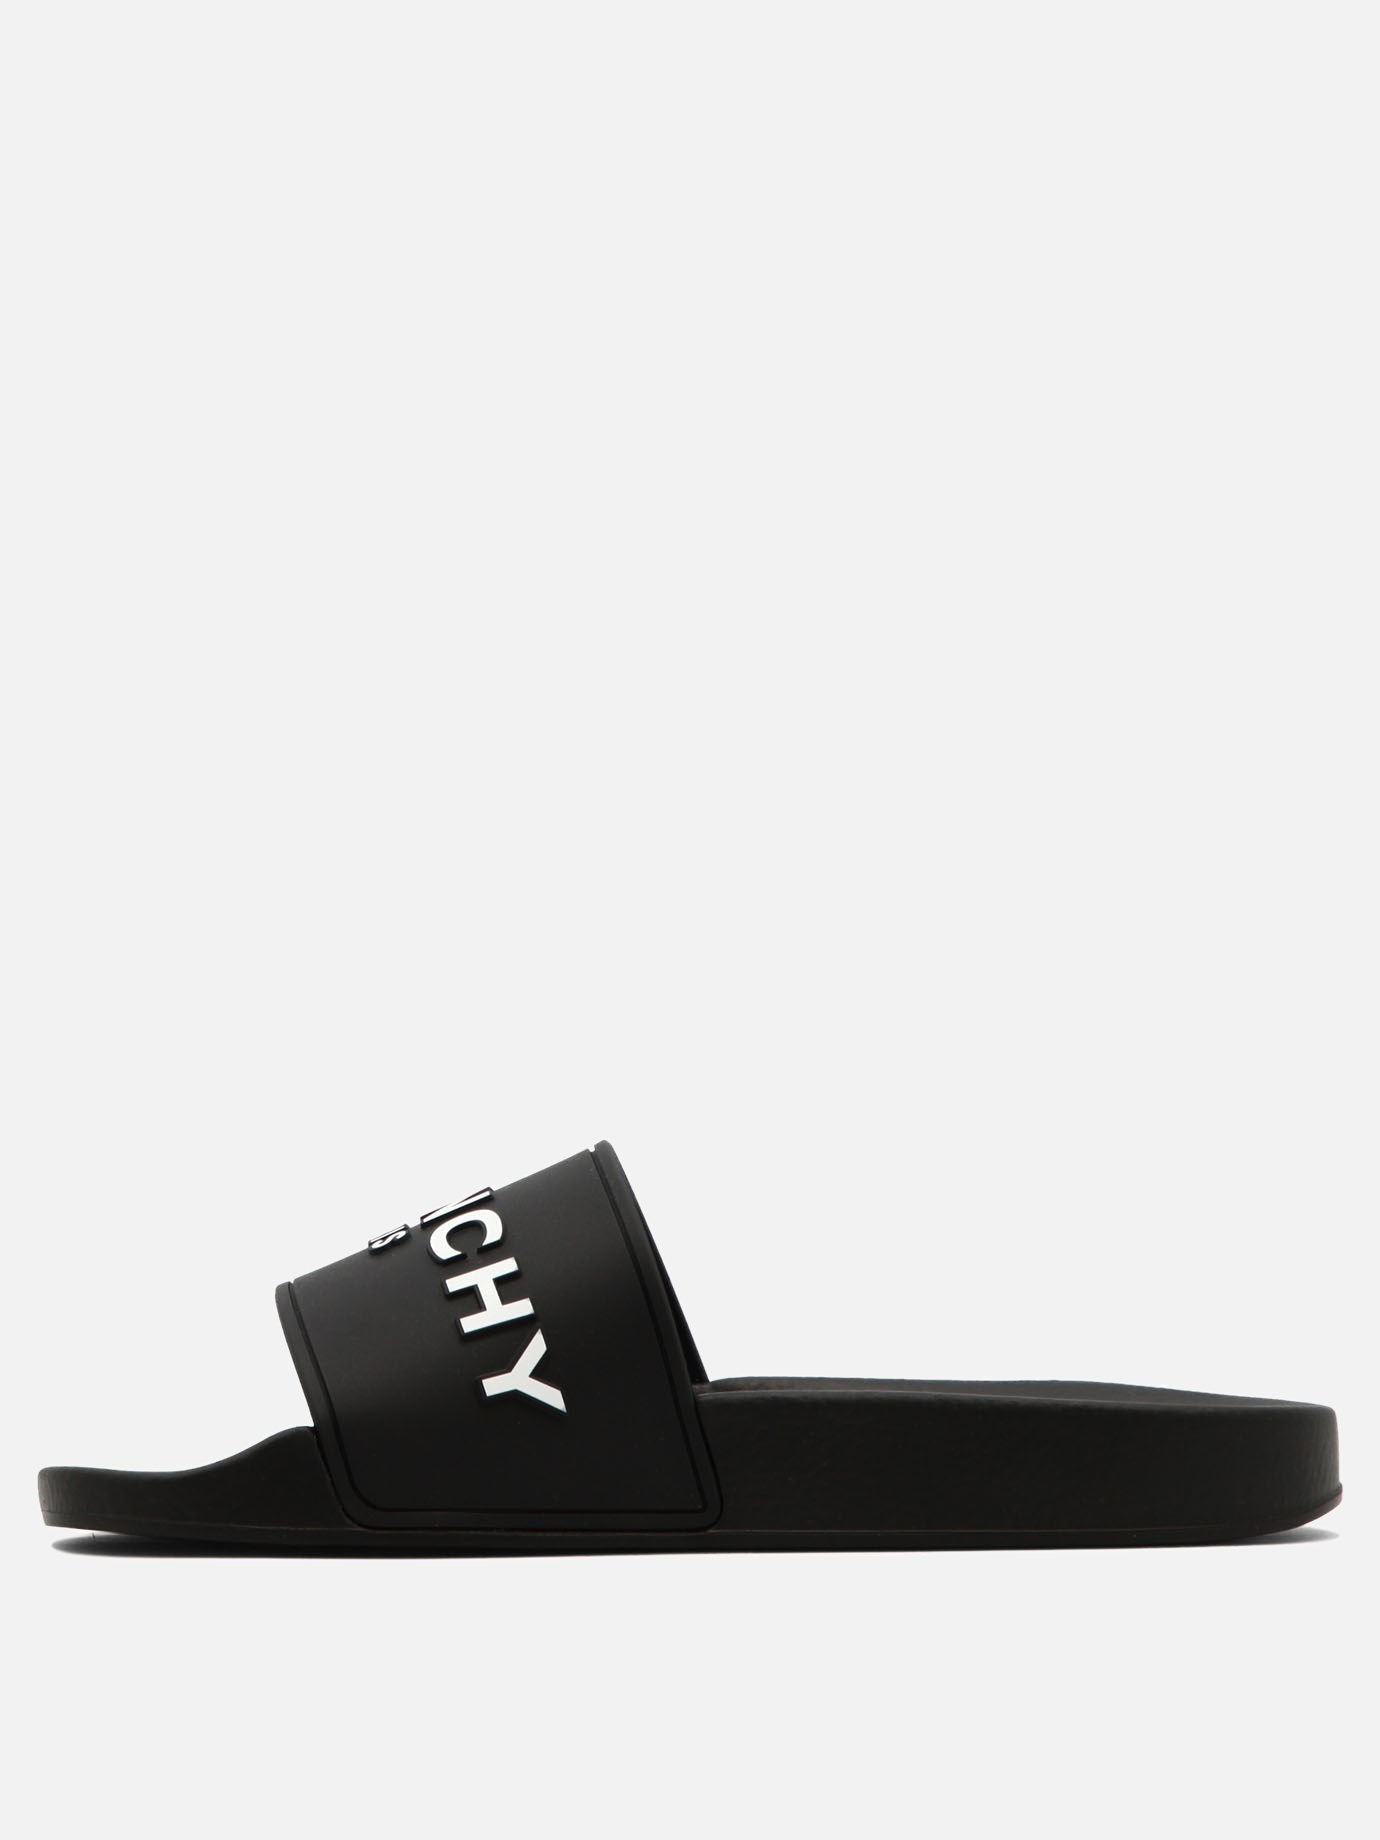  Slide  sandals by Givenchy